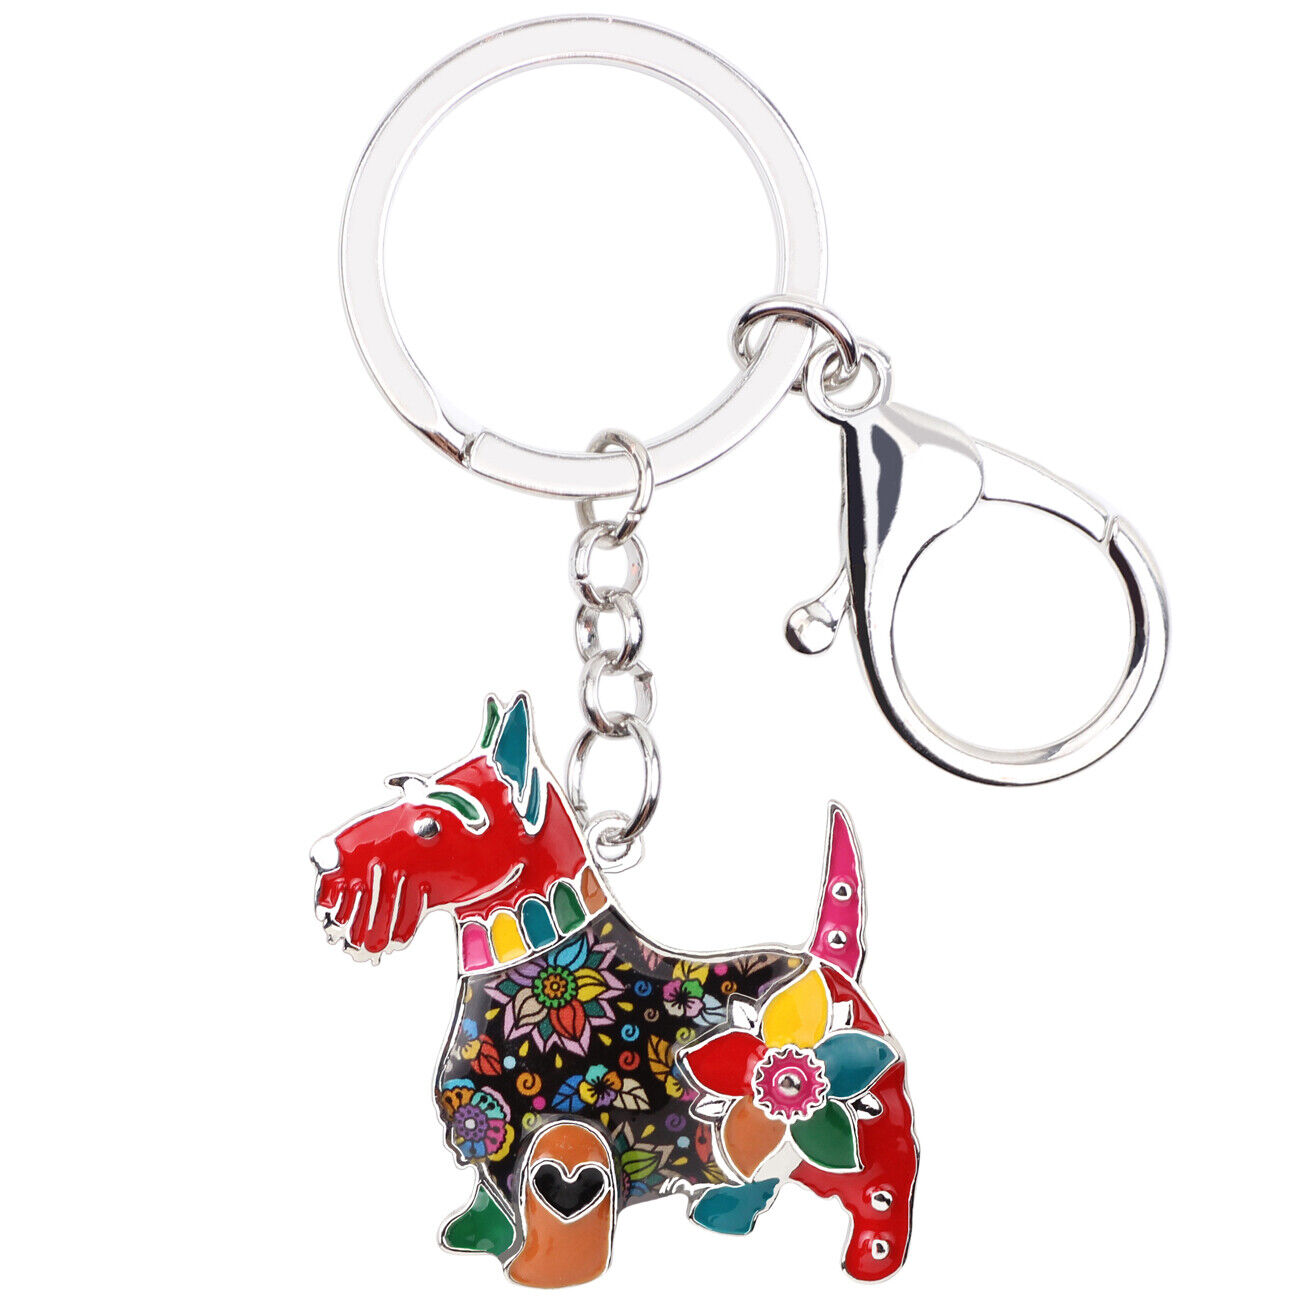 Enamel Alloy Scottish Terrier Dog Keychains Car Key Ring Pets Jewelry Bag Charms